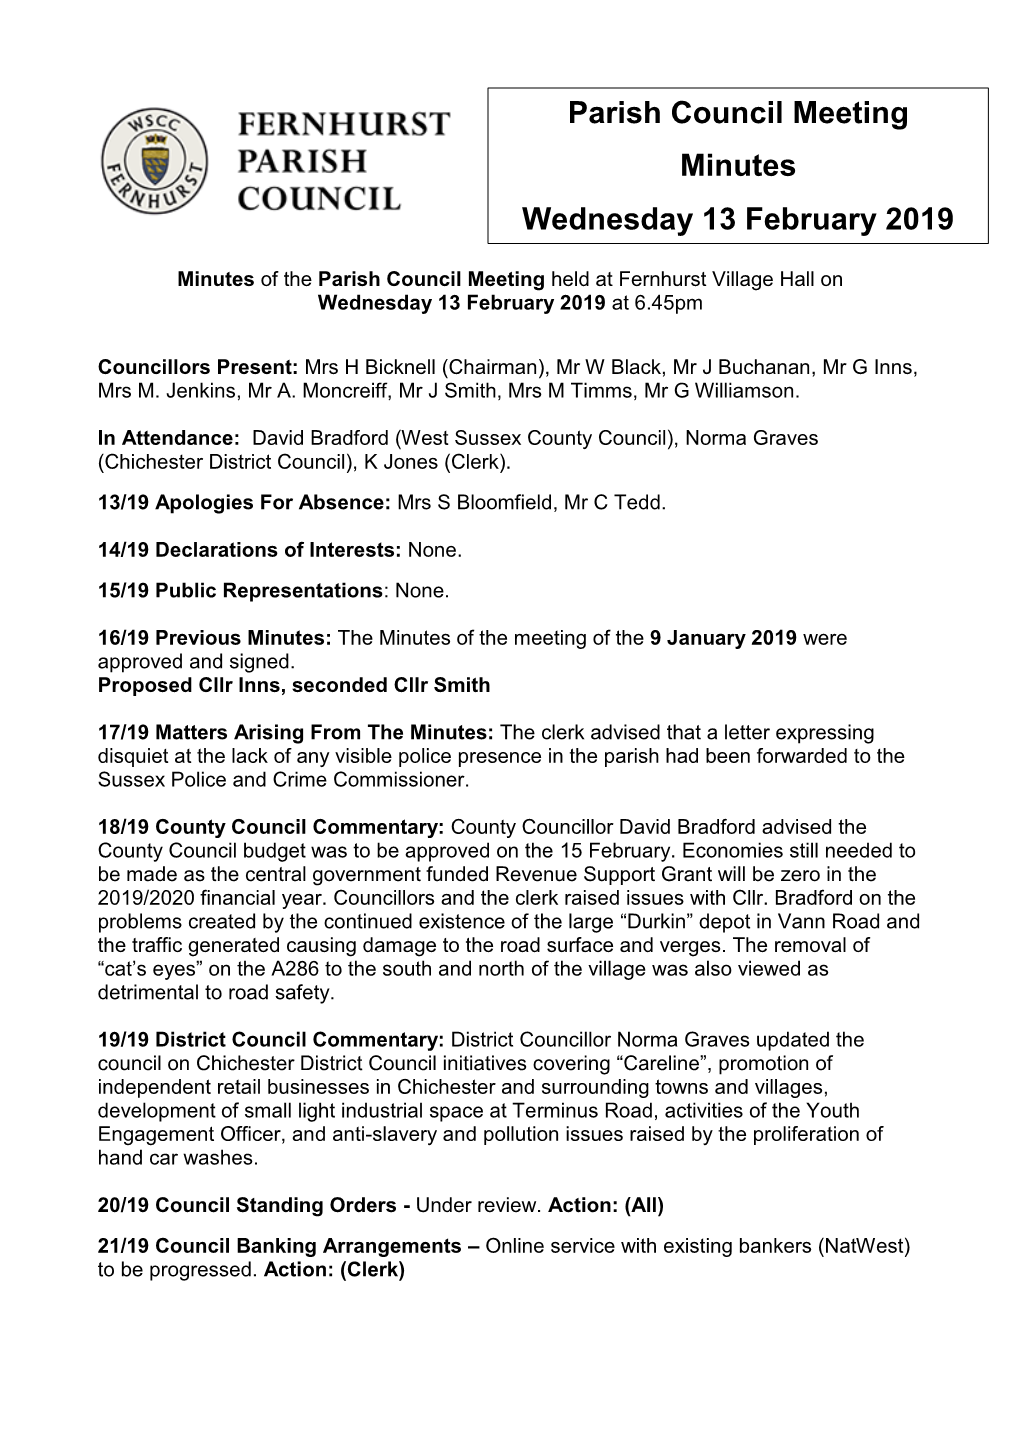 Full Council Meeting – Minutes – 13 February 2019